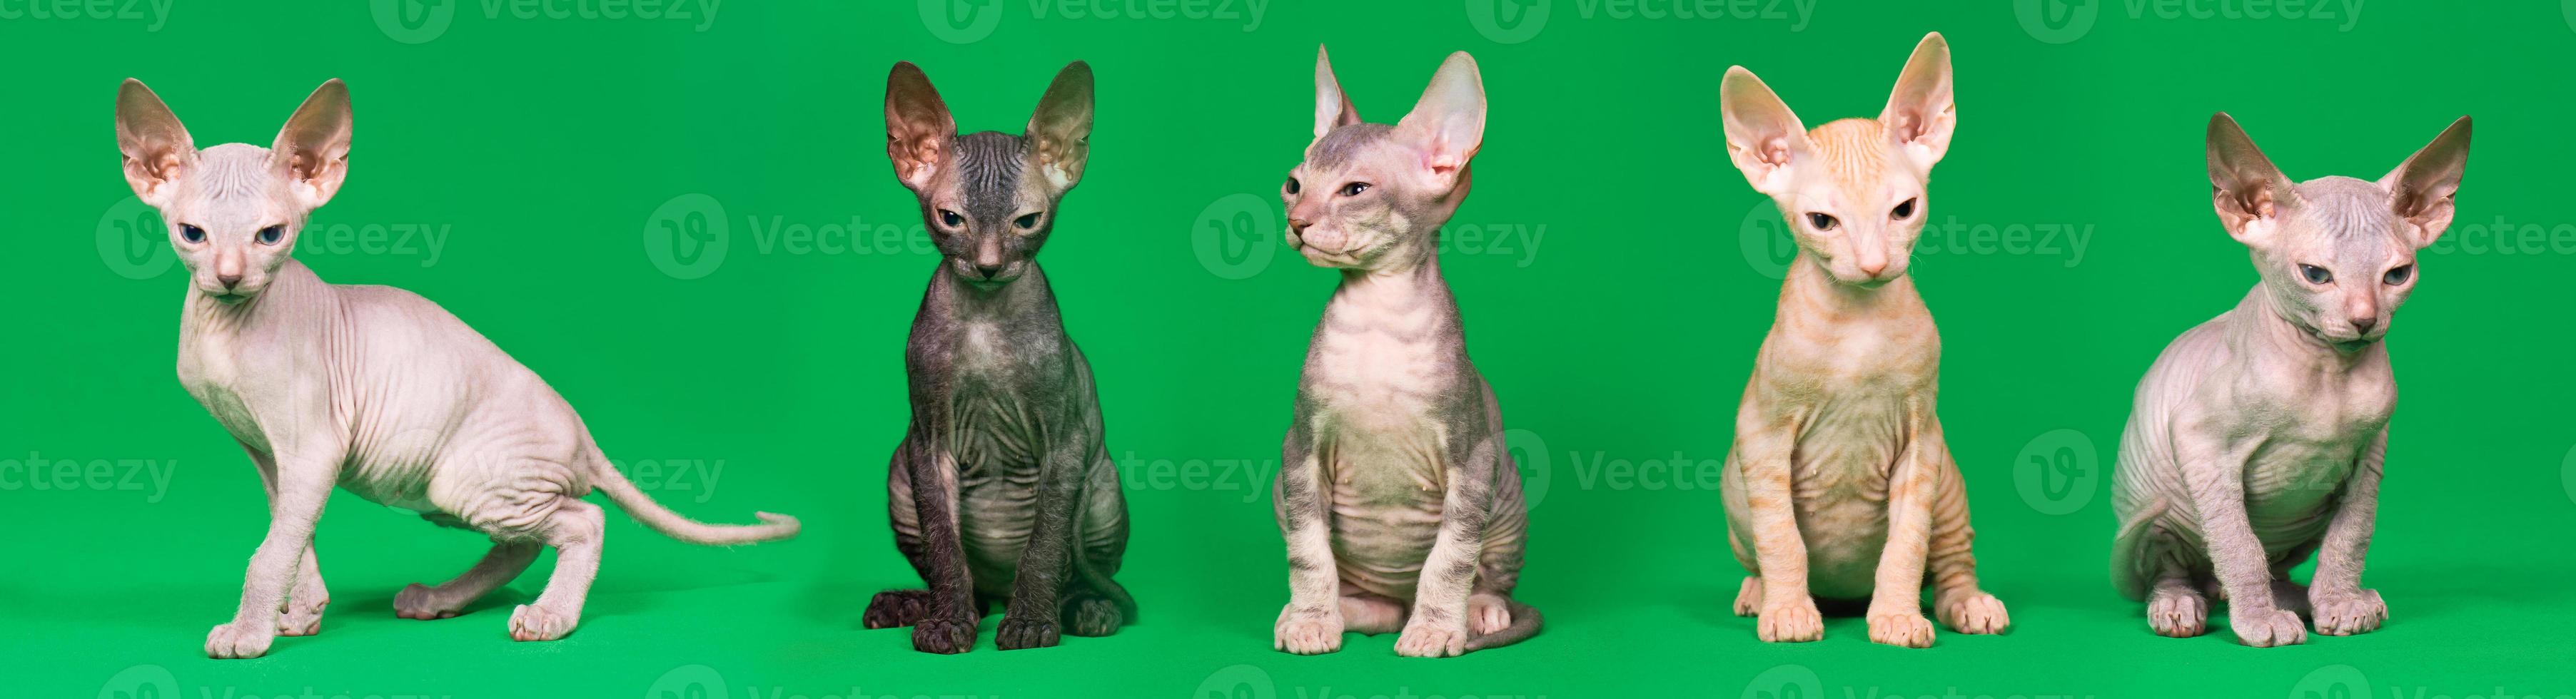 Don sphynx chatons photo